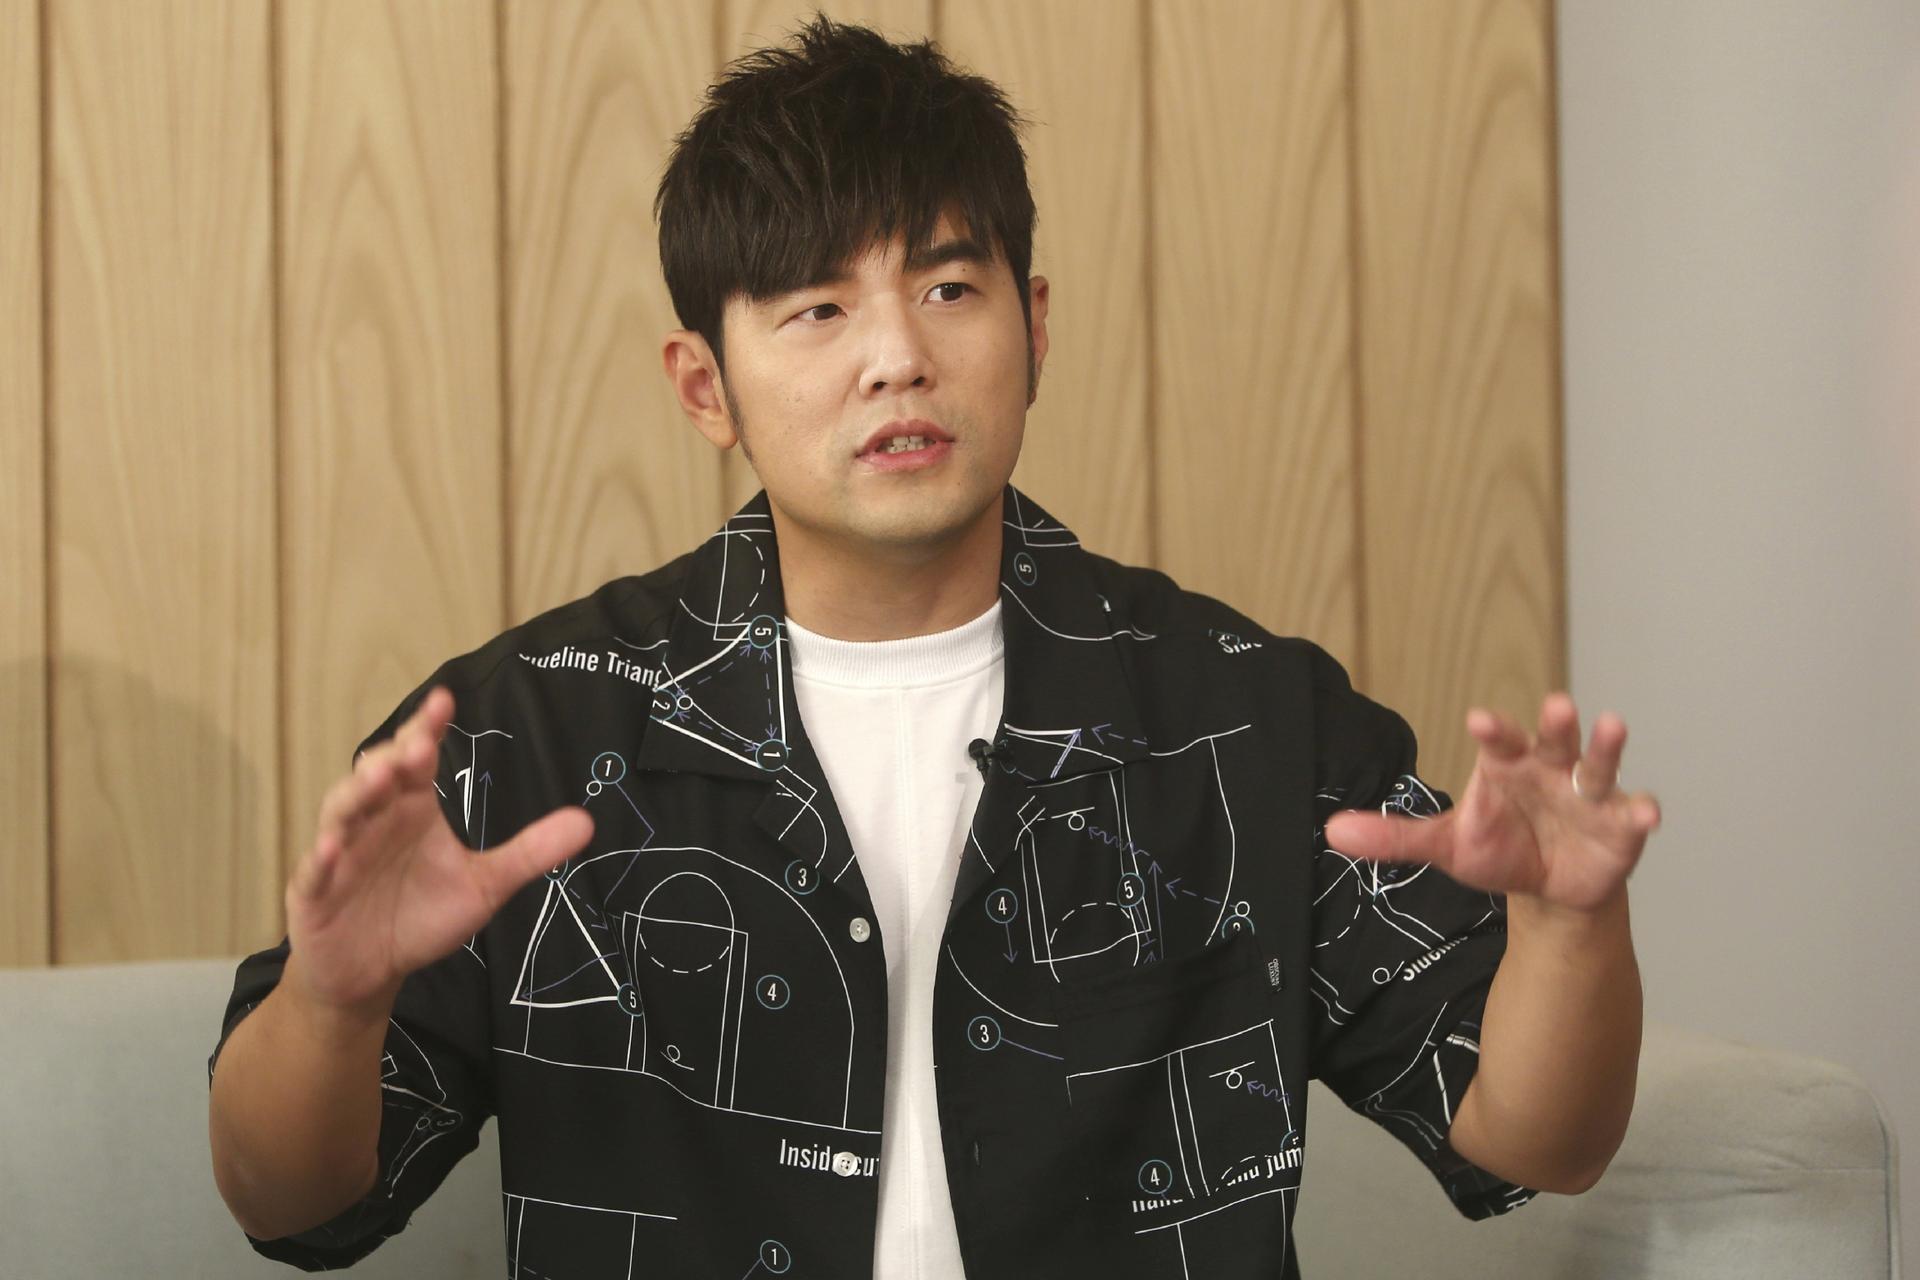 Mandopop superstar Jay Chou gestures while talking about his latest Netflix show "J-Style Trip" and life with his children during an interview, Taipei, Taiwan